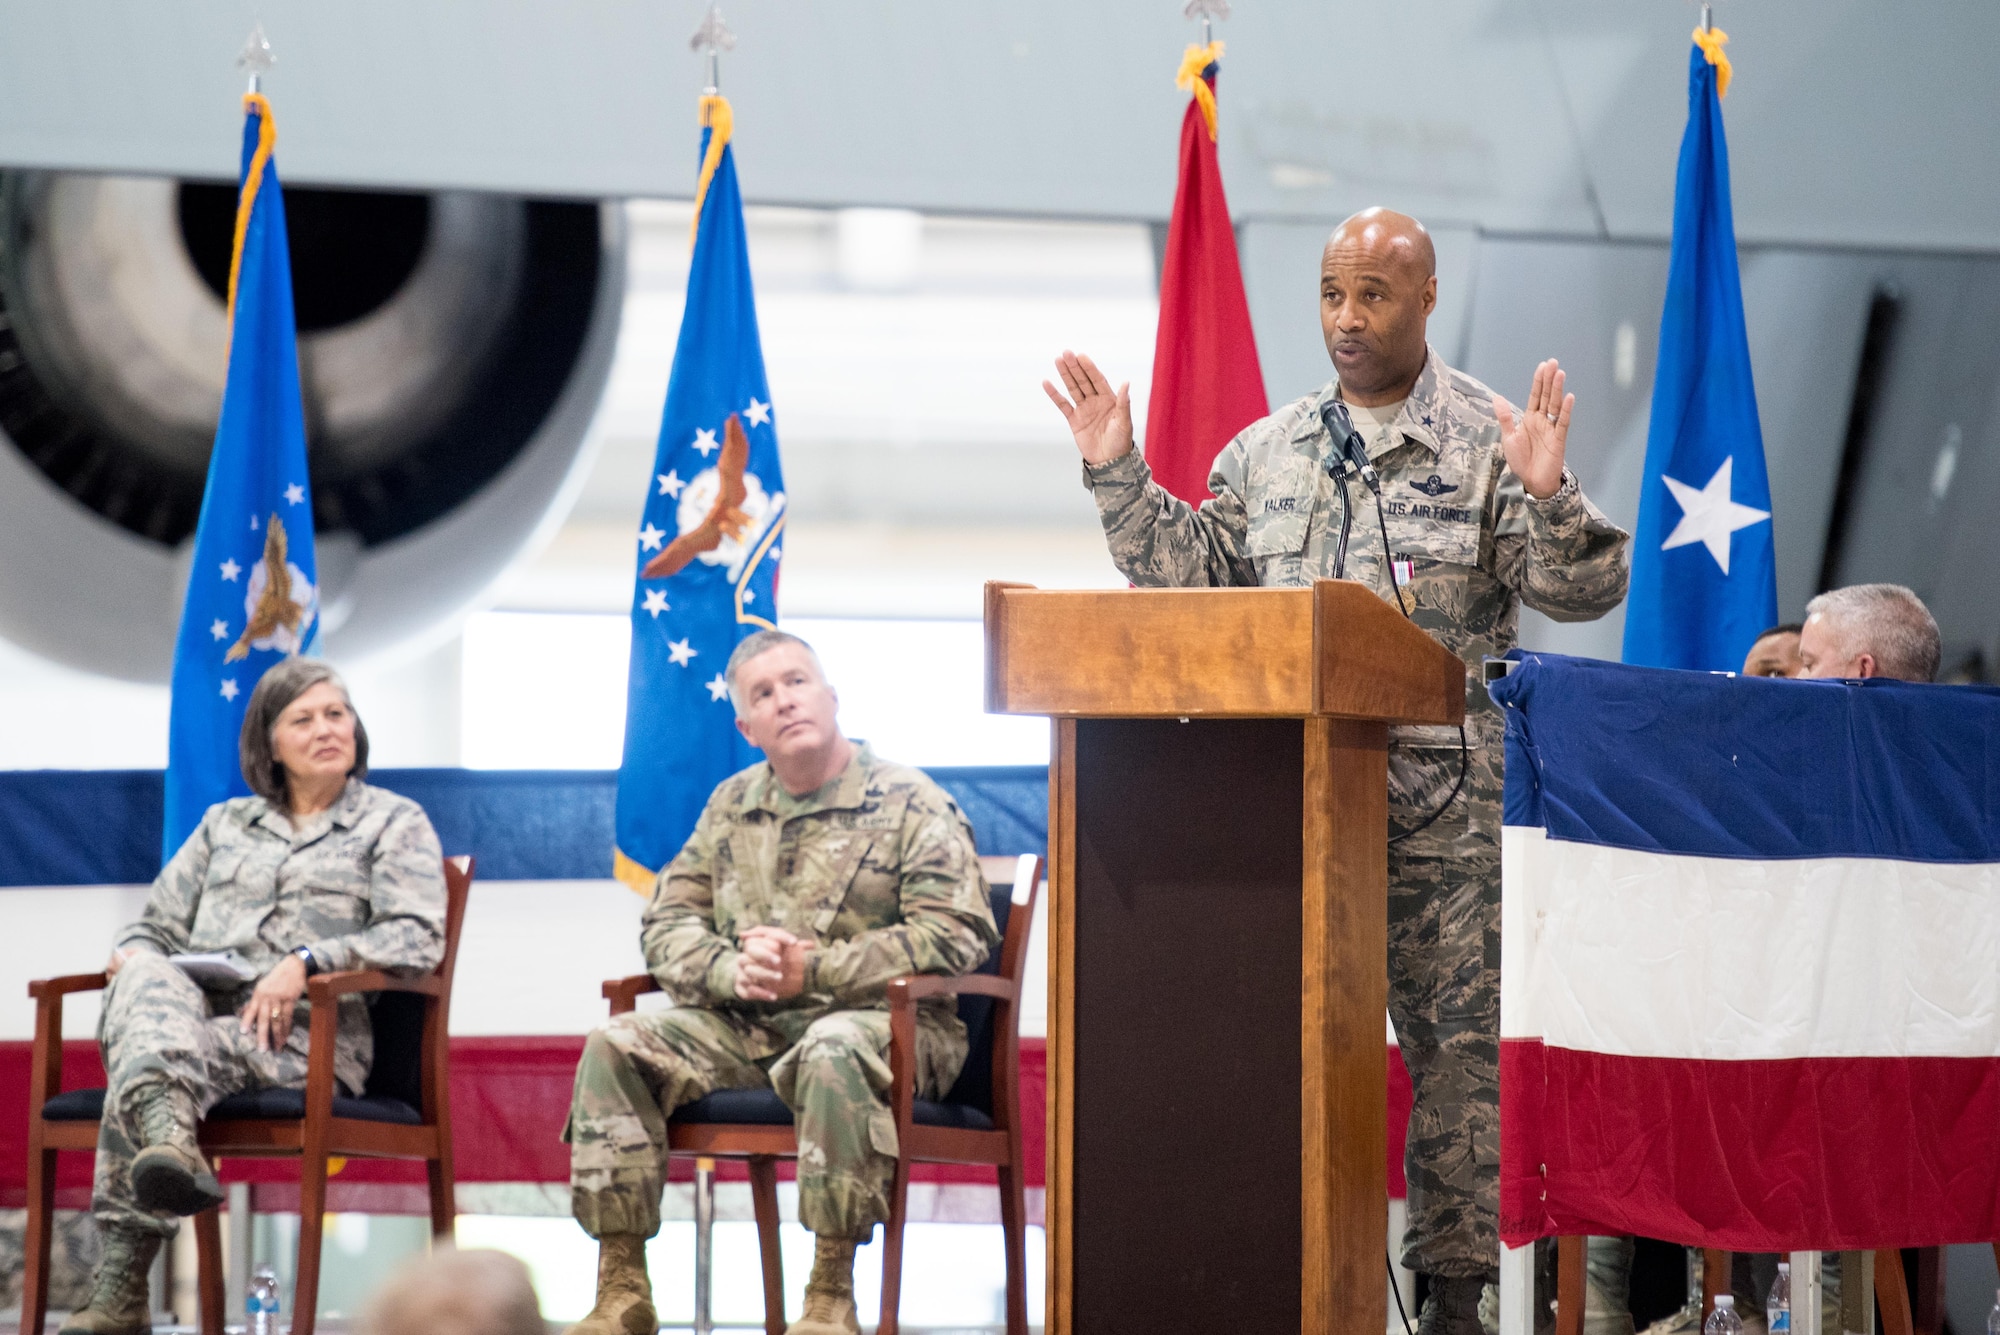 Brig. Gen. Christopher "Mookie" Walker, Chief of Staff for the West Virginia Air National Guard, makes remarks during his promotion ceremony held at the 167th Airlift Wing, Martinsburg W.Va., Oct. 14. Seated behind him are Brig. Gen. Paige Hunter, the Assistant Adjutant General for Air of the West Virginia National Guard and Maj. Gen. James Hoyer, the Adjutant General for the West Virginia National Guard. (U.S. Air National Guard photo by Staff Sgt. Jodie Witmer)